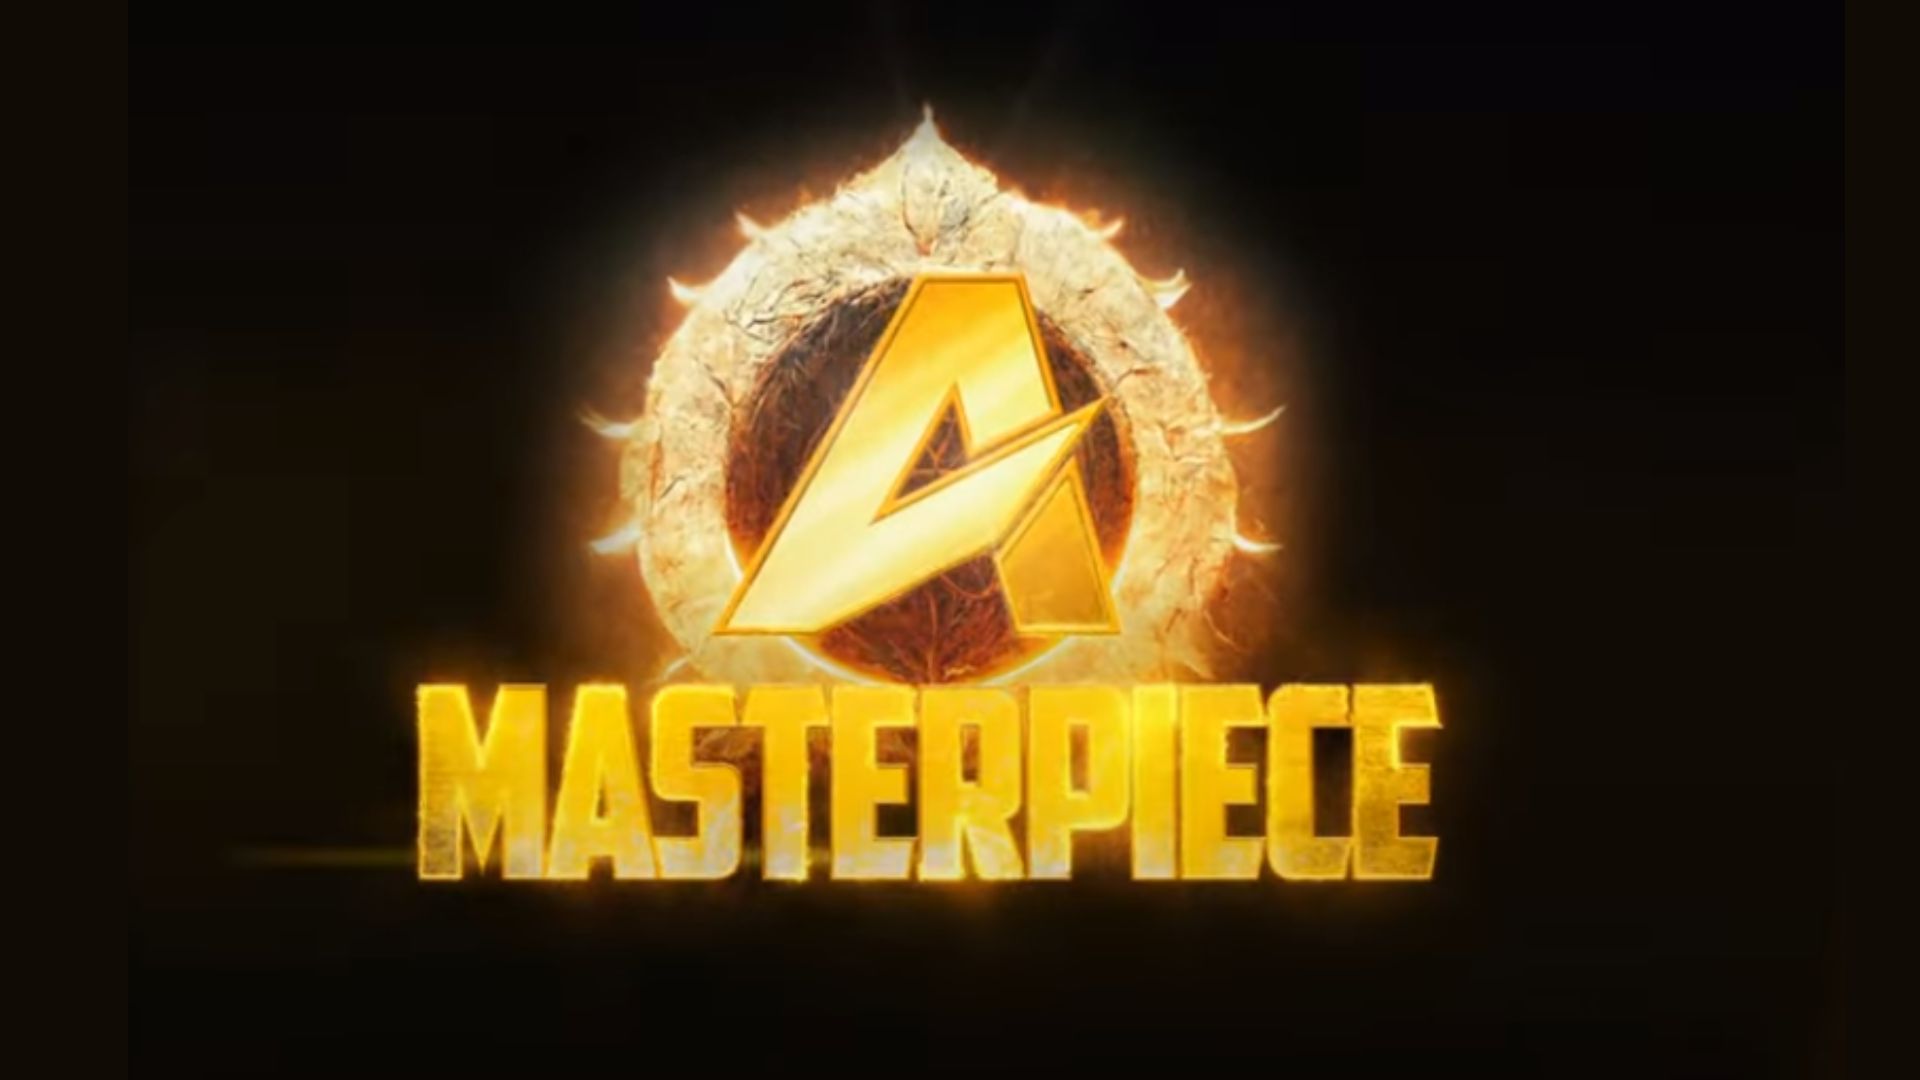 A Masterpiece: Rise of Superhero Teaser Out Now